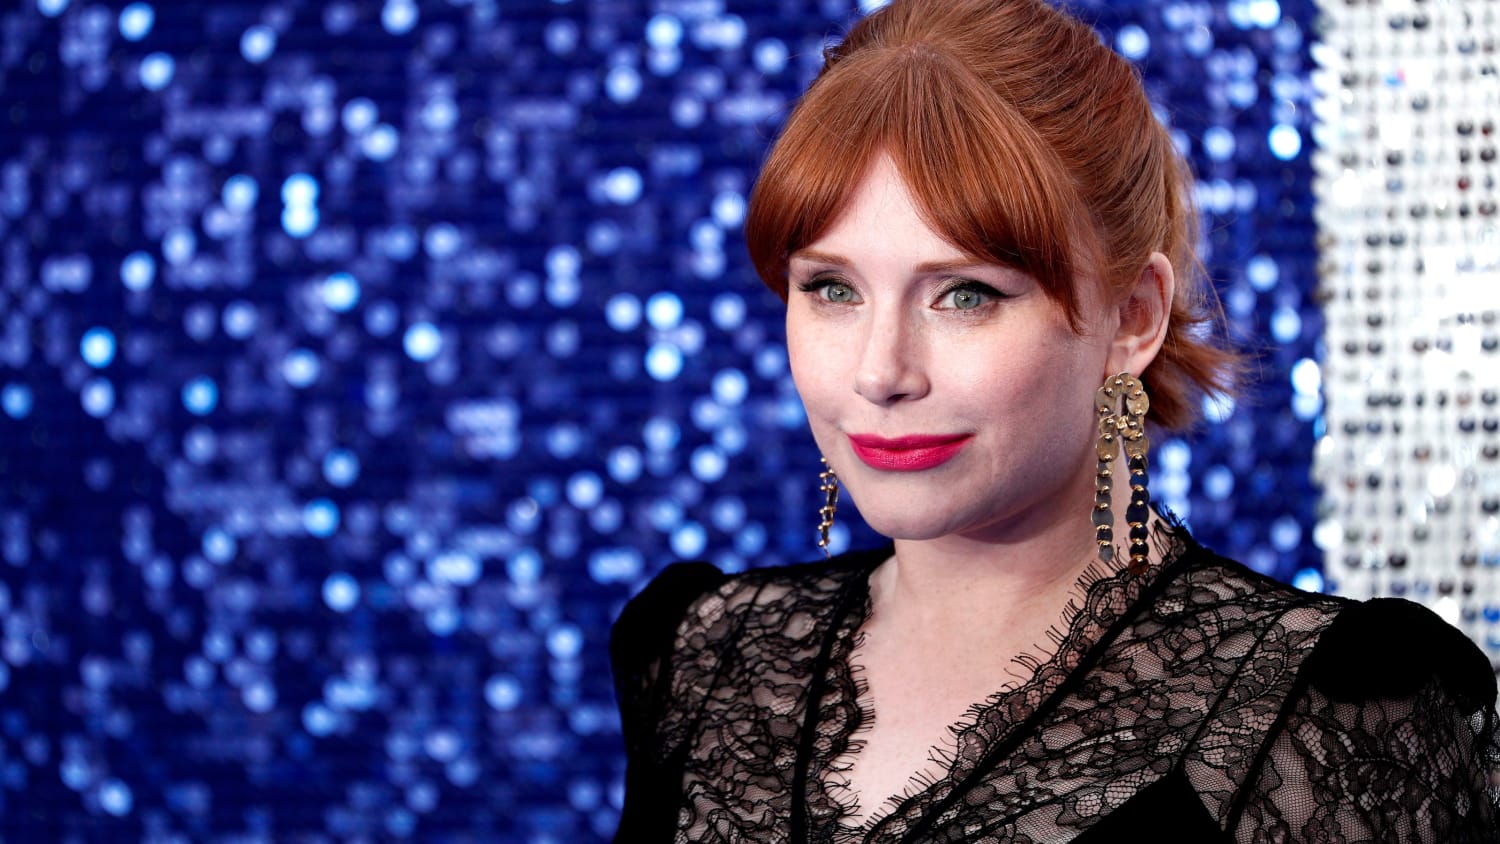 Bryce Dallas Howard graduates from NYU after enrolling in 1999: '21 years in the making'